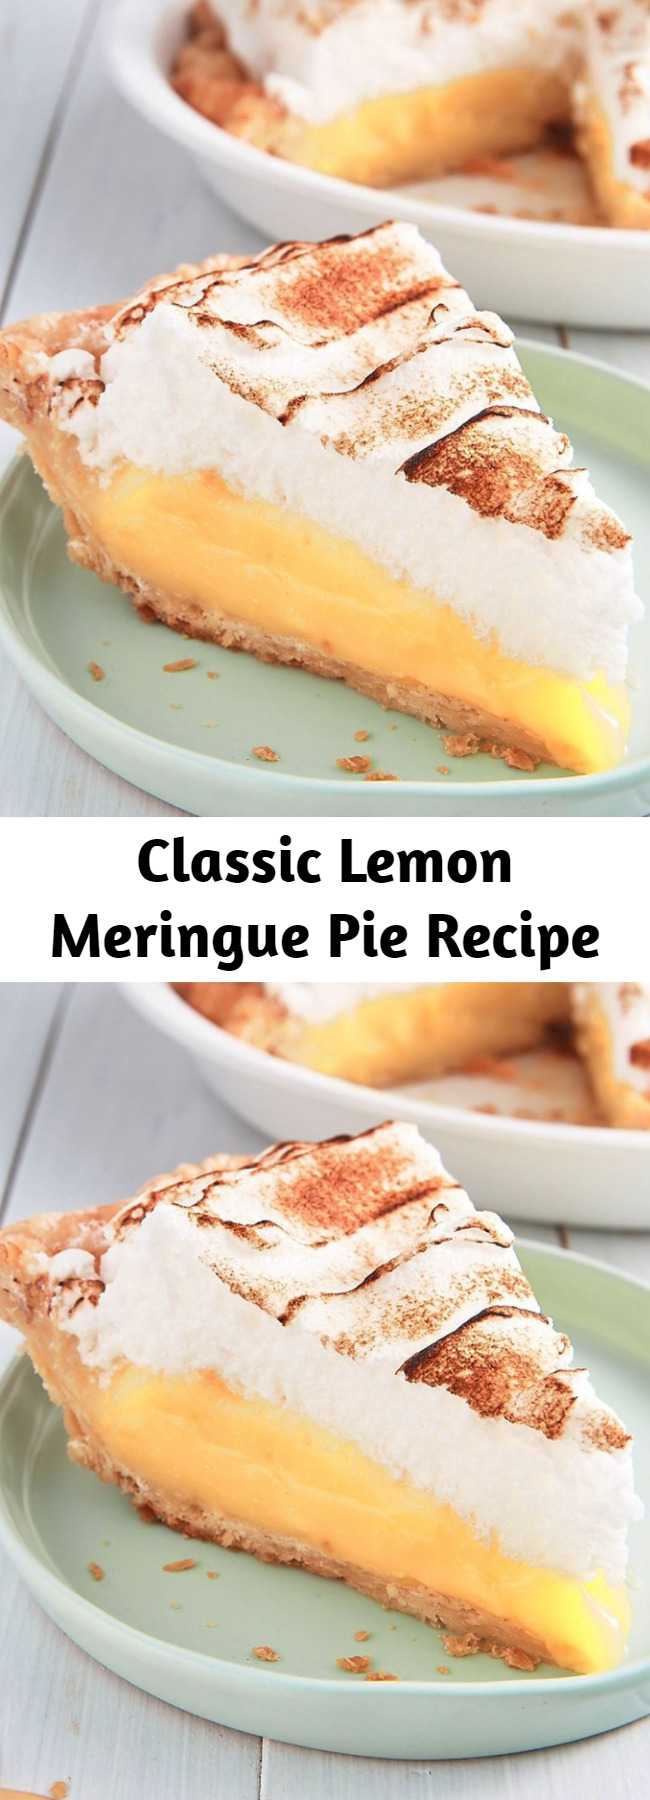 Classic Lemon Meringue Pie Recipe - This Lemon Meringue Pie uses both lemon zest and juice to strike the perfect balance between sweet and tart, plus it has a showstopping meringue topping.